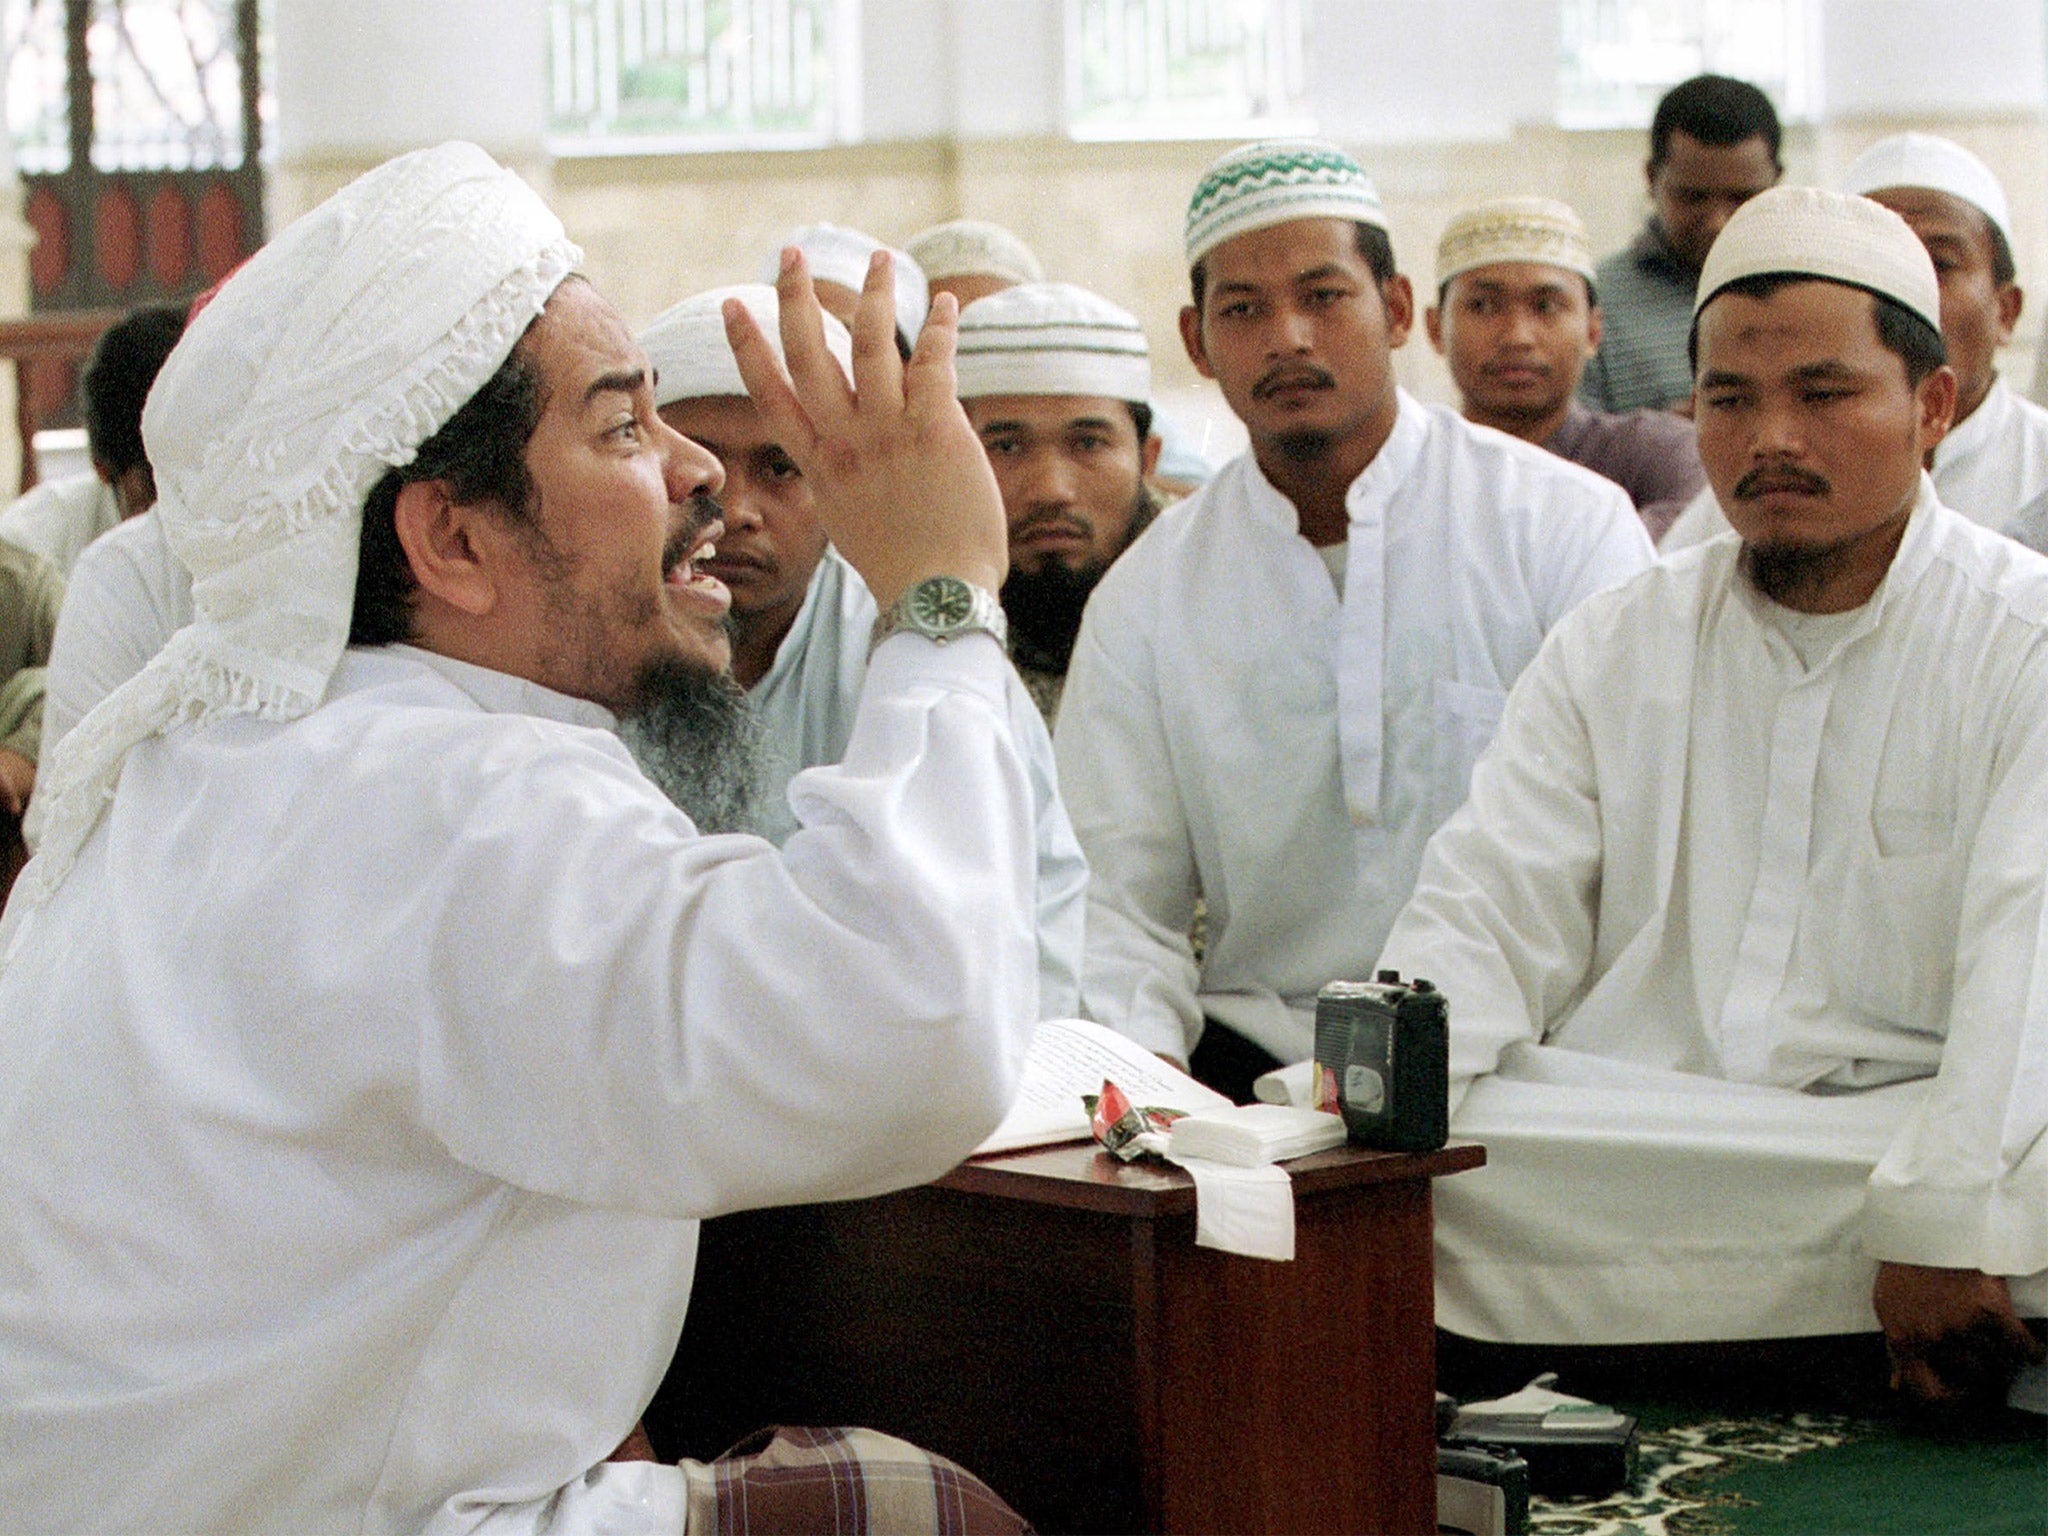 Jafar Umar Thalib, commander of the Java-based militant group Laskar Jihad, preaches at a mosque in Aceh, Indonesia, in 2002 (Getty)